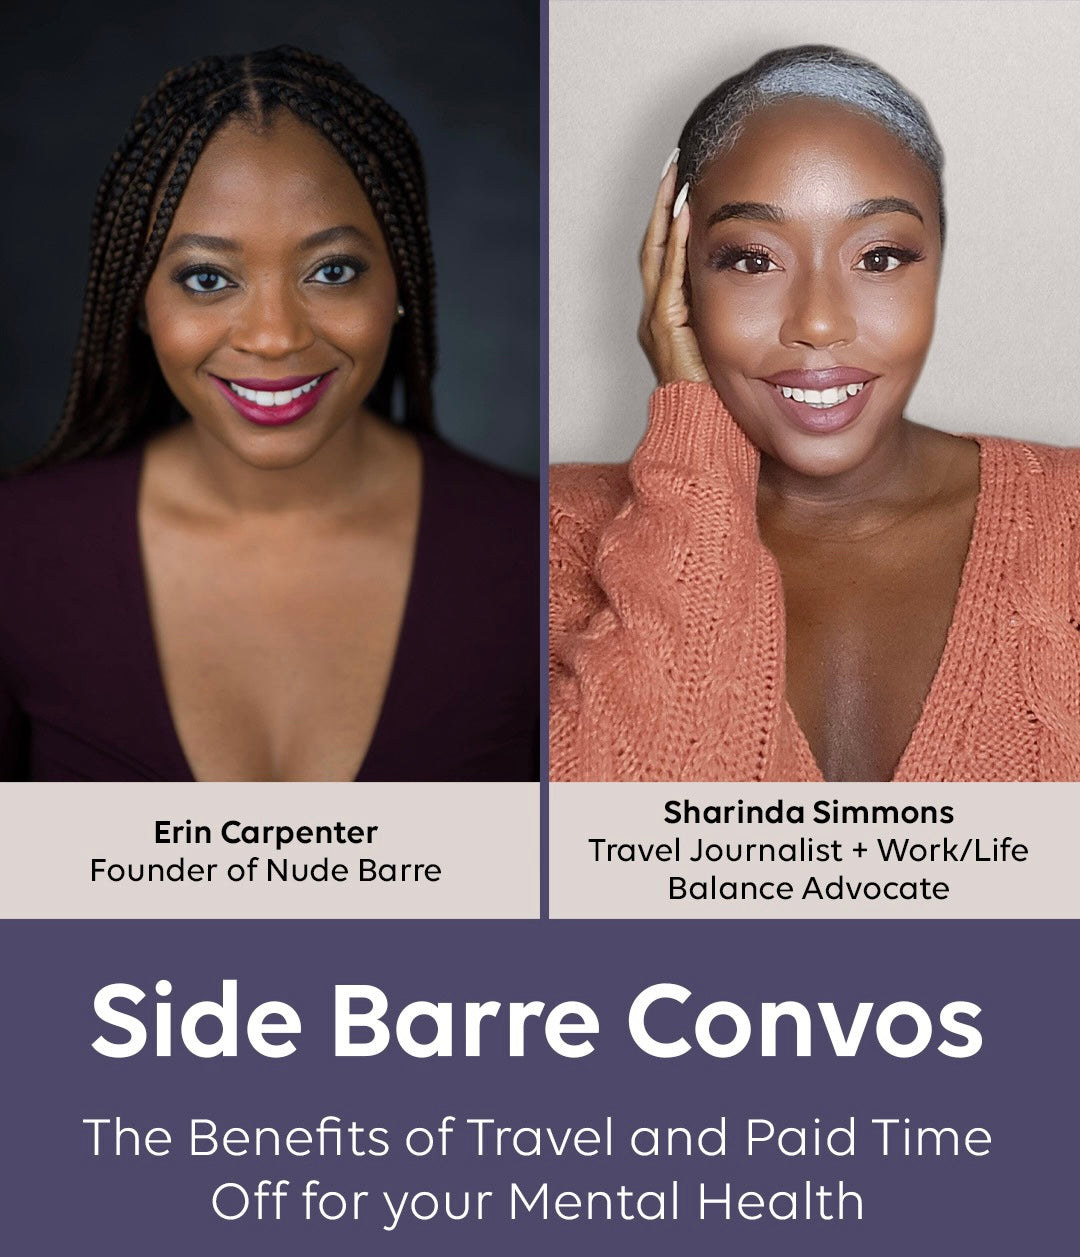 SIDE BARRE Convos | The Benefits of PTO & Travel for your Mental Health